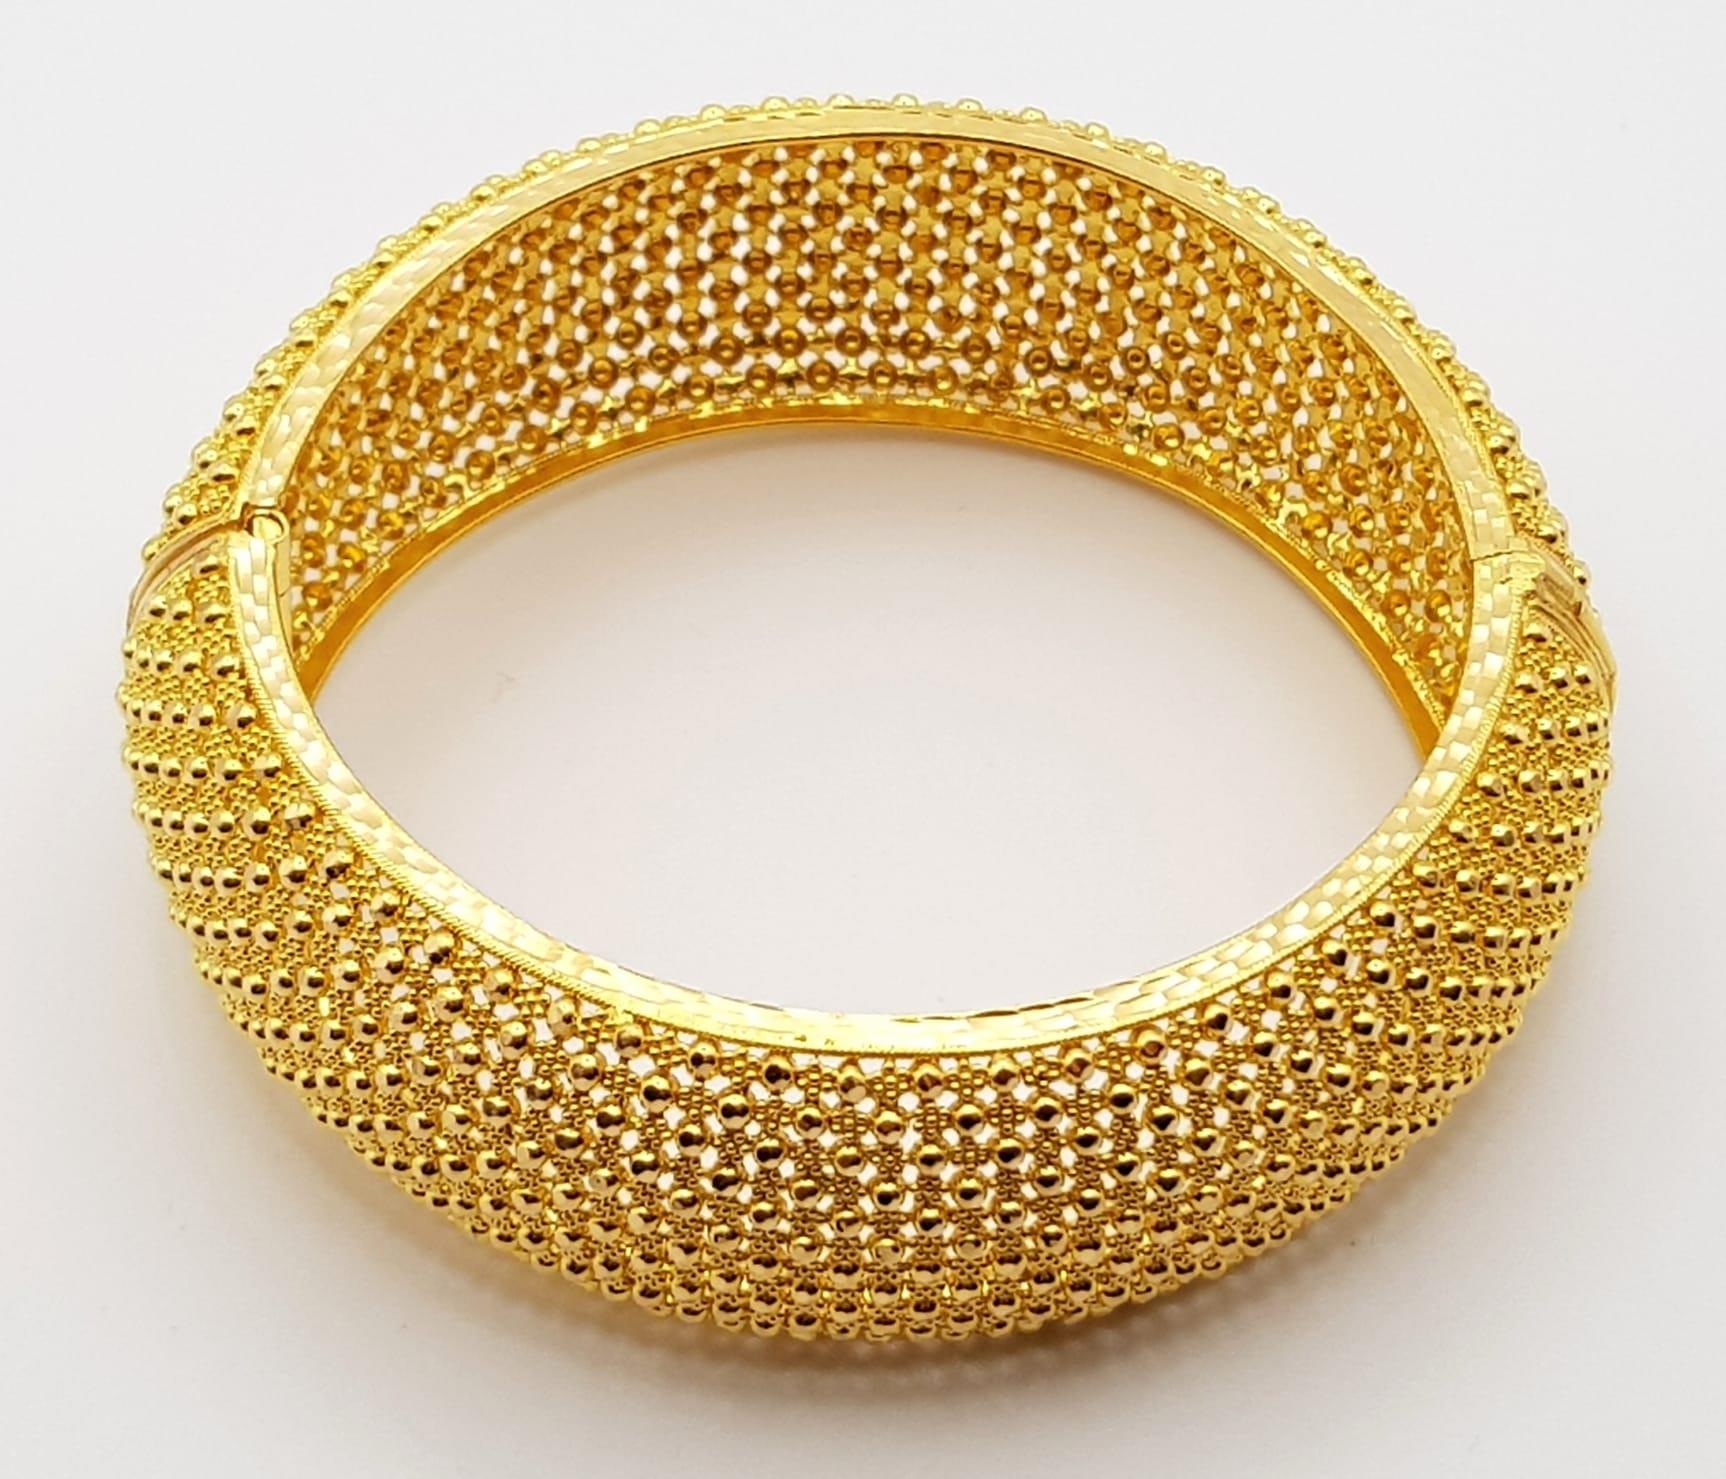 A 22k Yellow Gold Geometric Dimple Design Wide Bangle. 6cm inner diameter. 43.2g. - Image 2 of 5